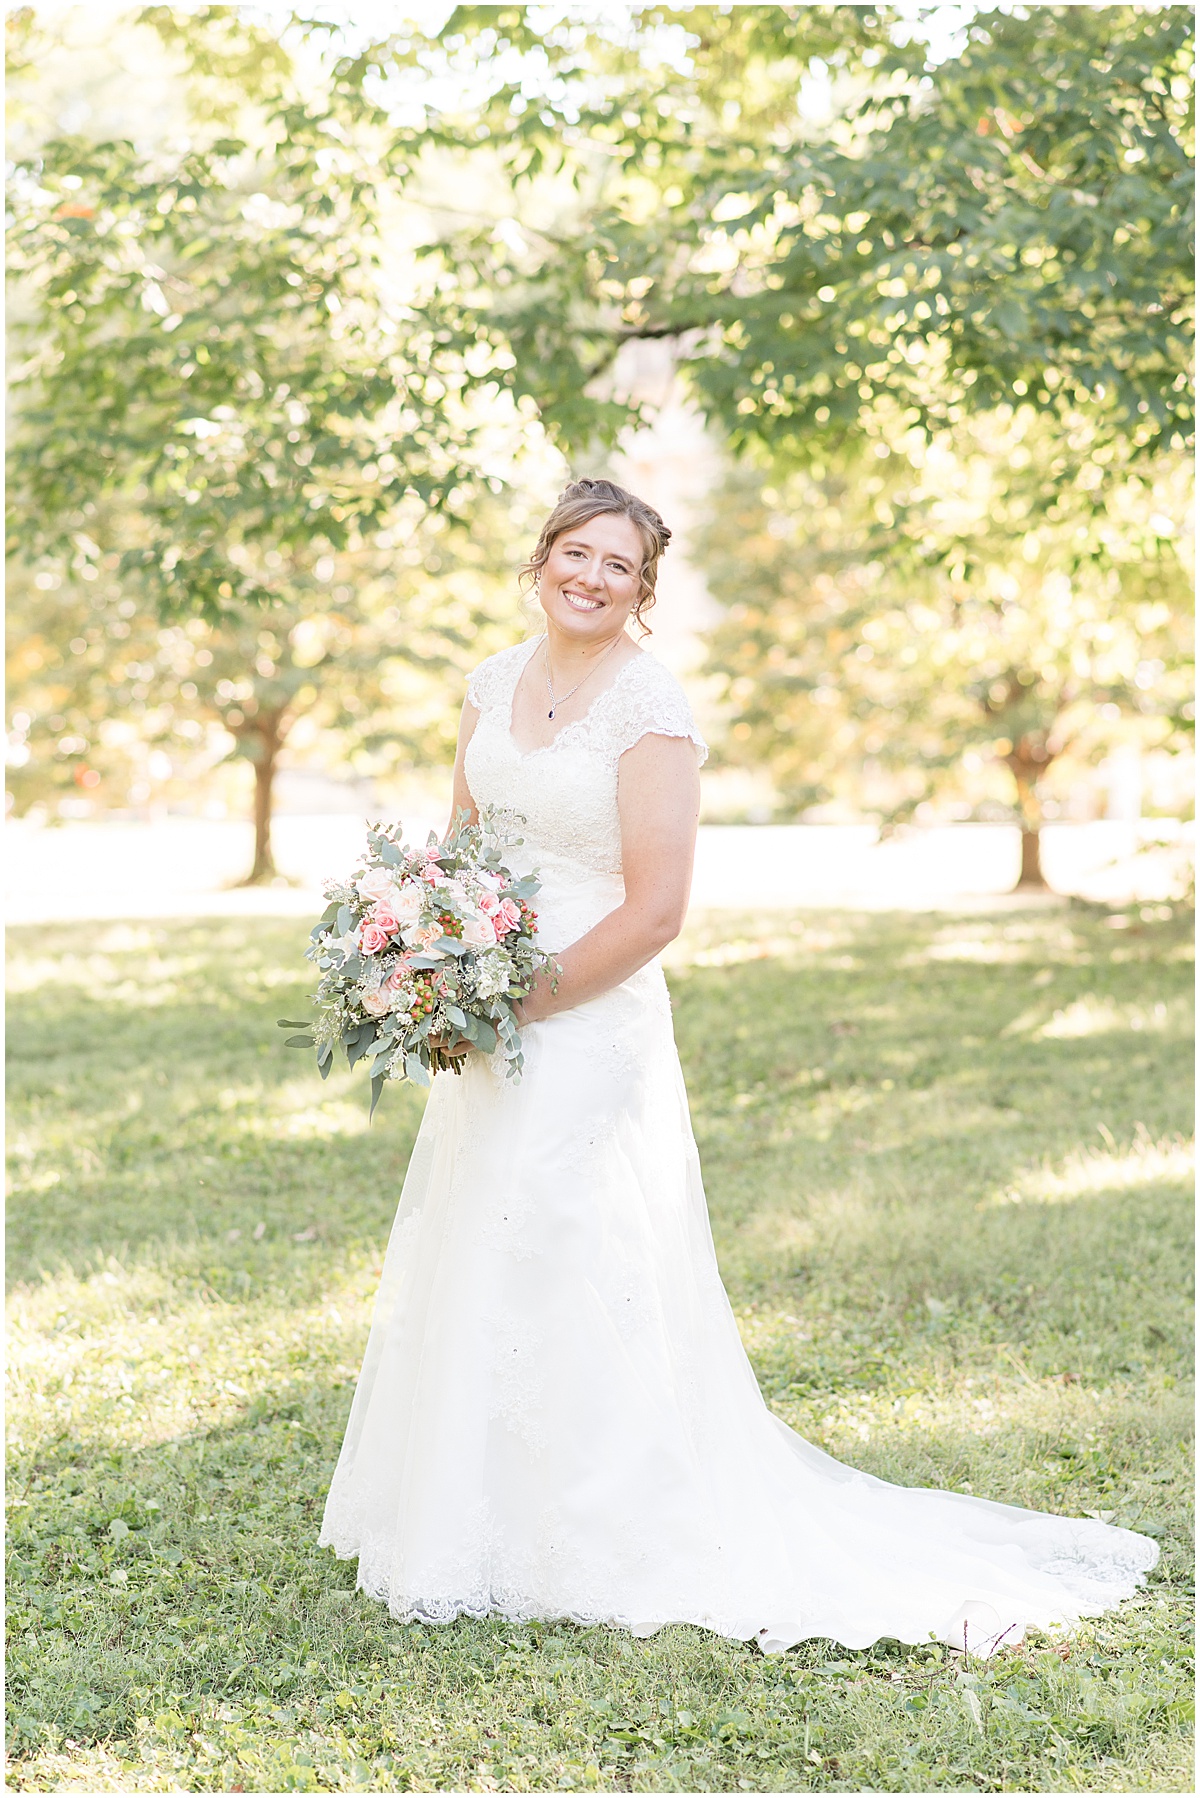 Bridal photos for intimate wedding at Holliday Park in Indianapolis